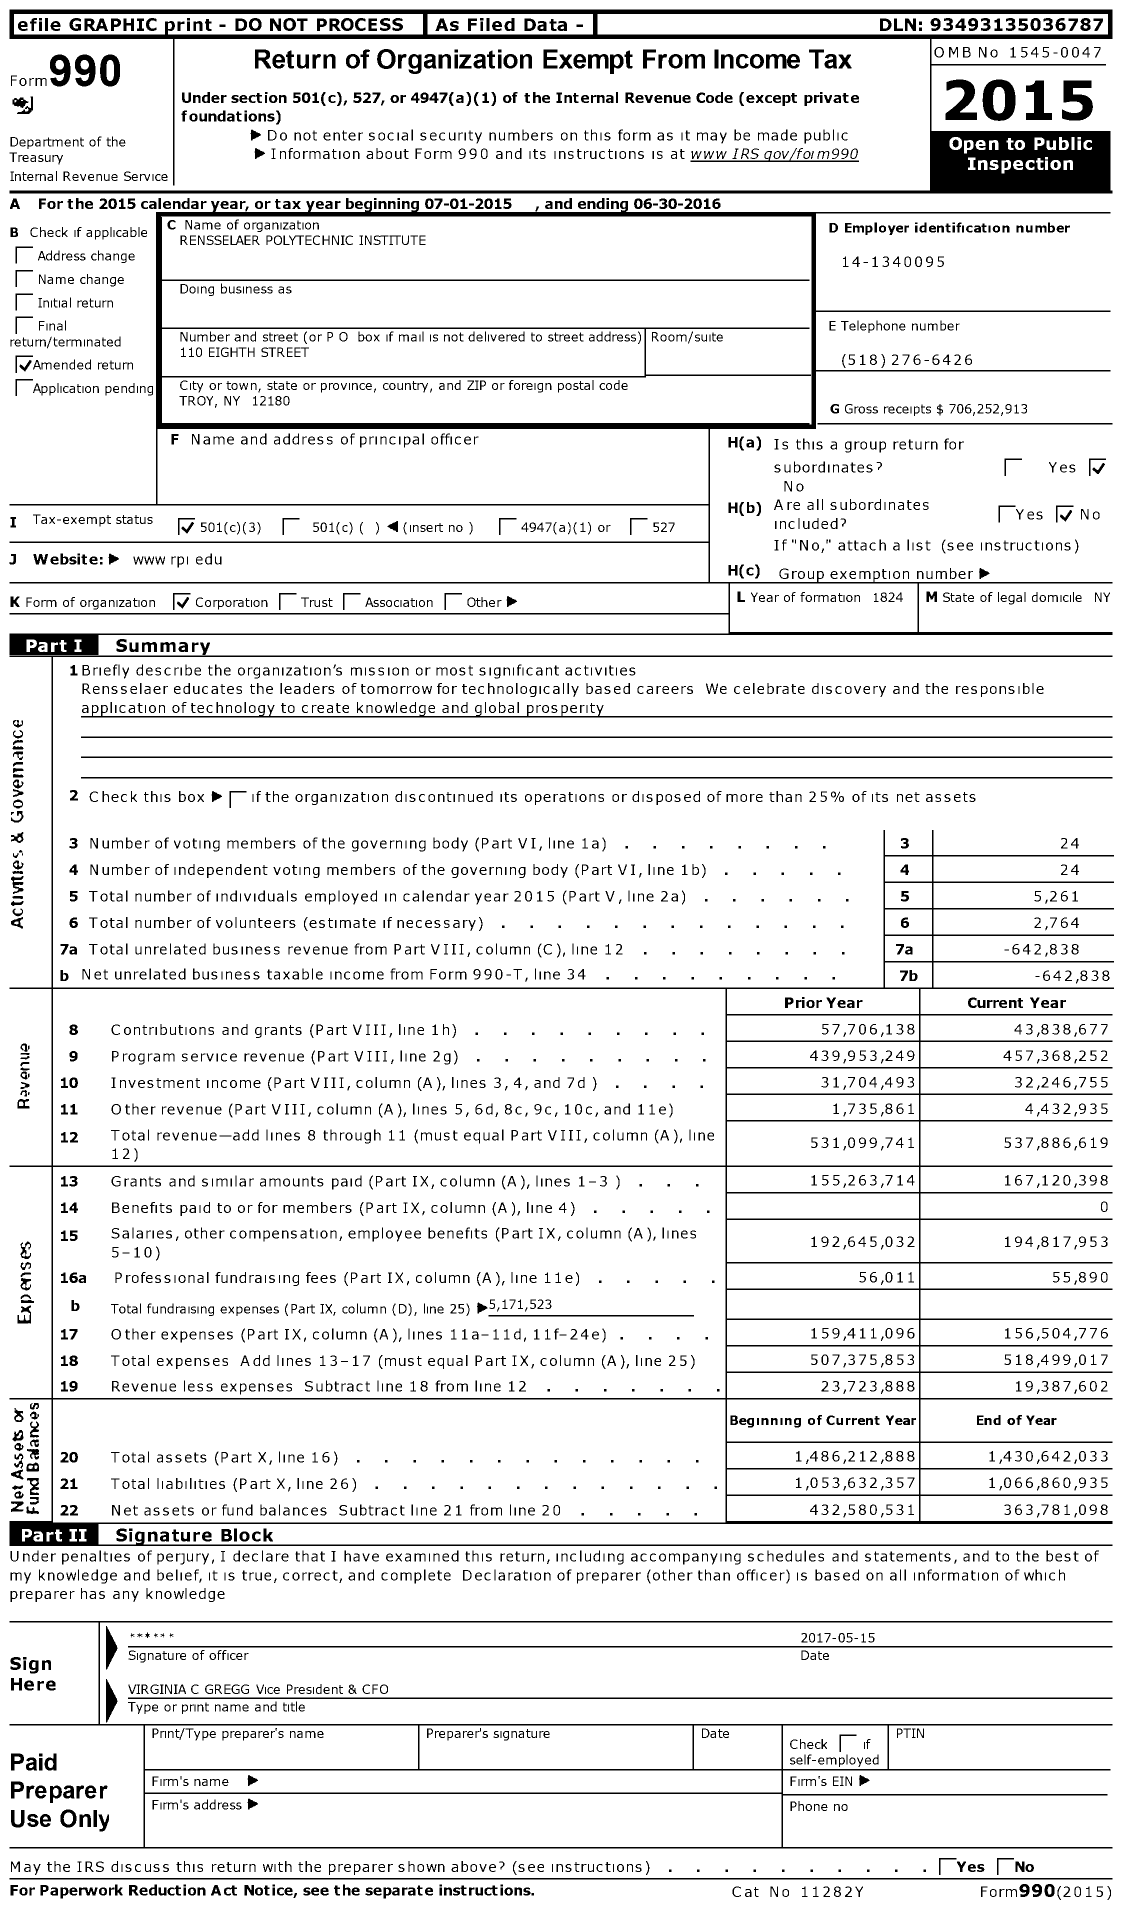 Image of first page of 2015 Form 990 for Rensselaer Polytechnic Institute (RPI)